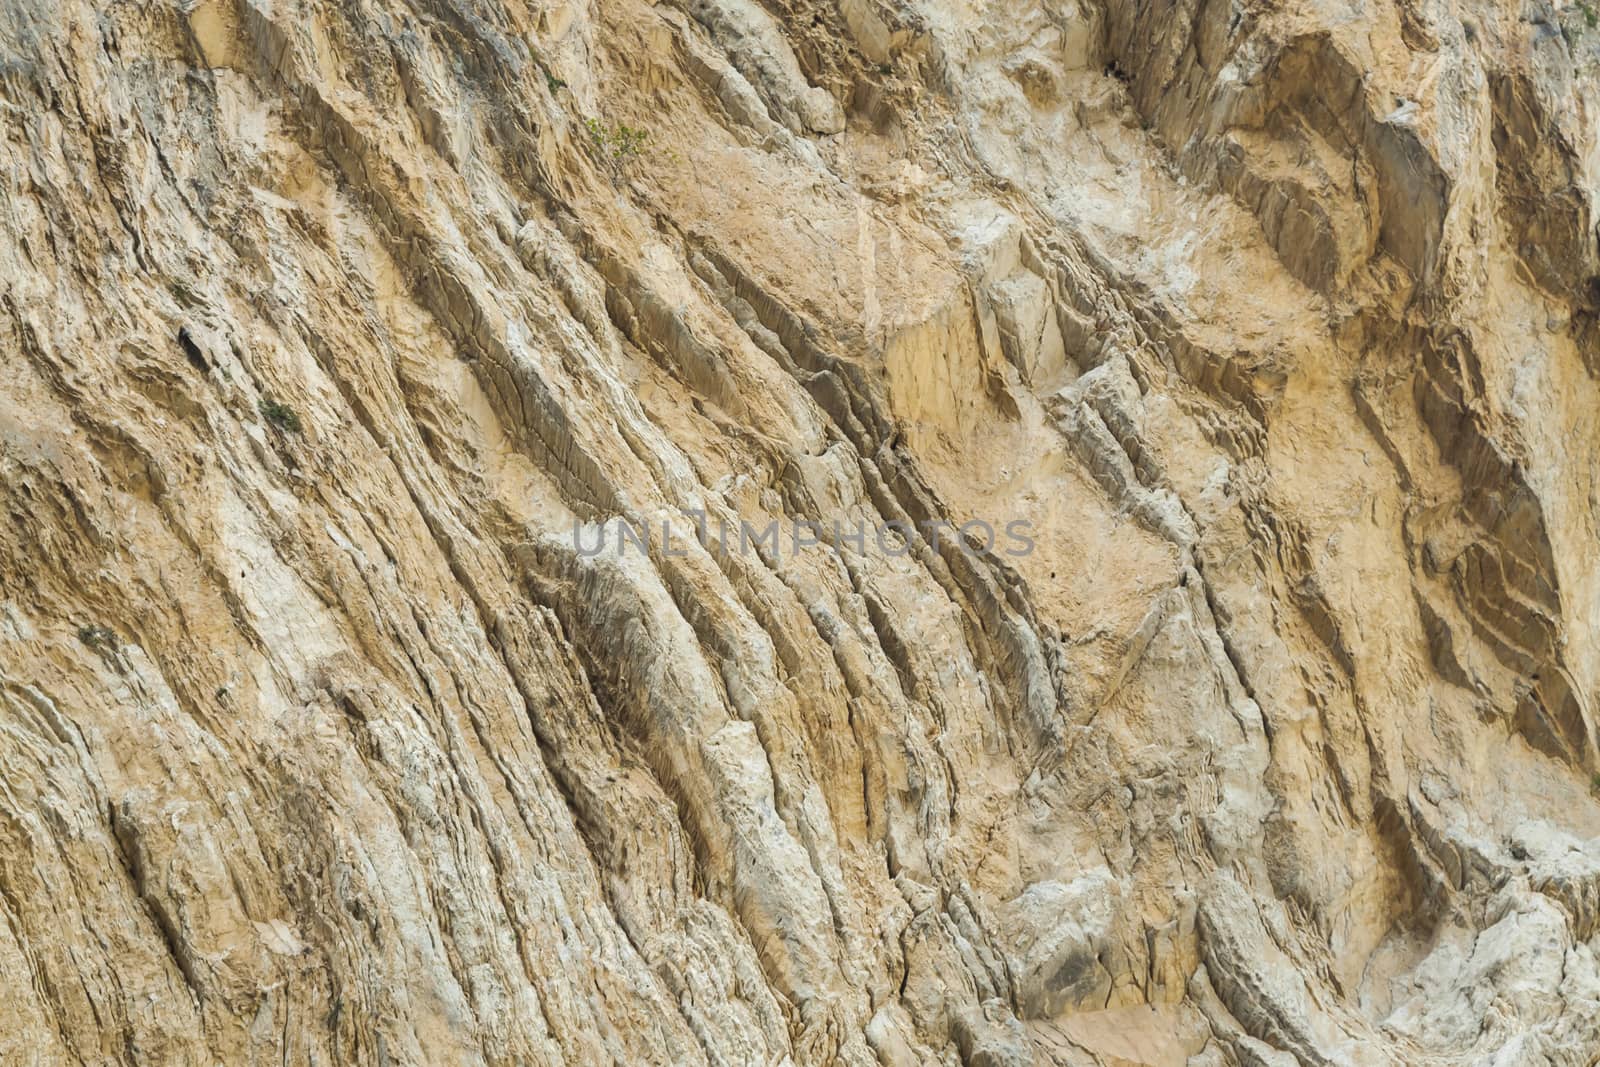 Close-up view of a particular geological stratification